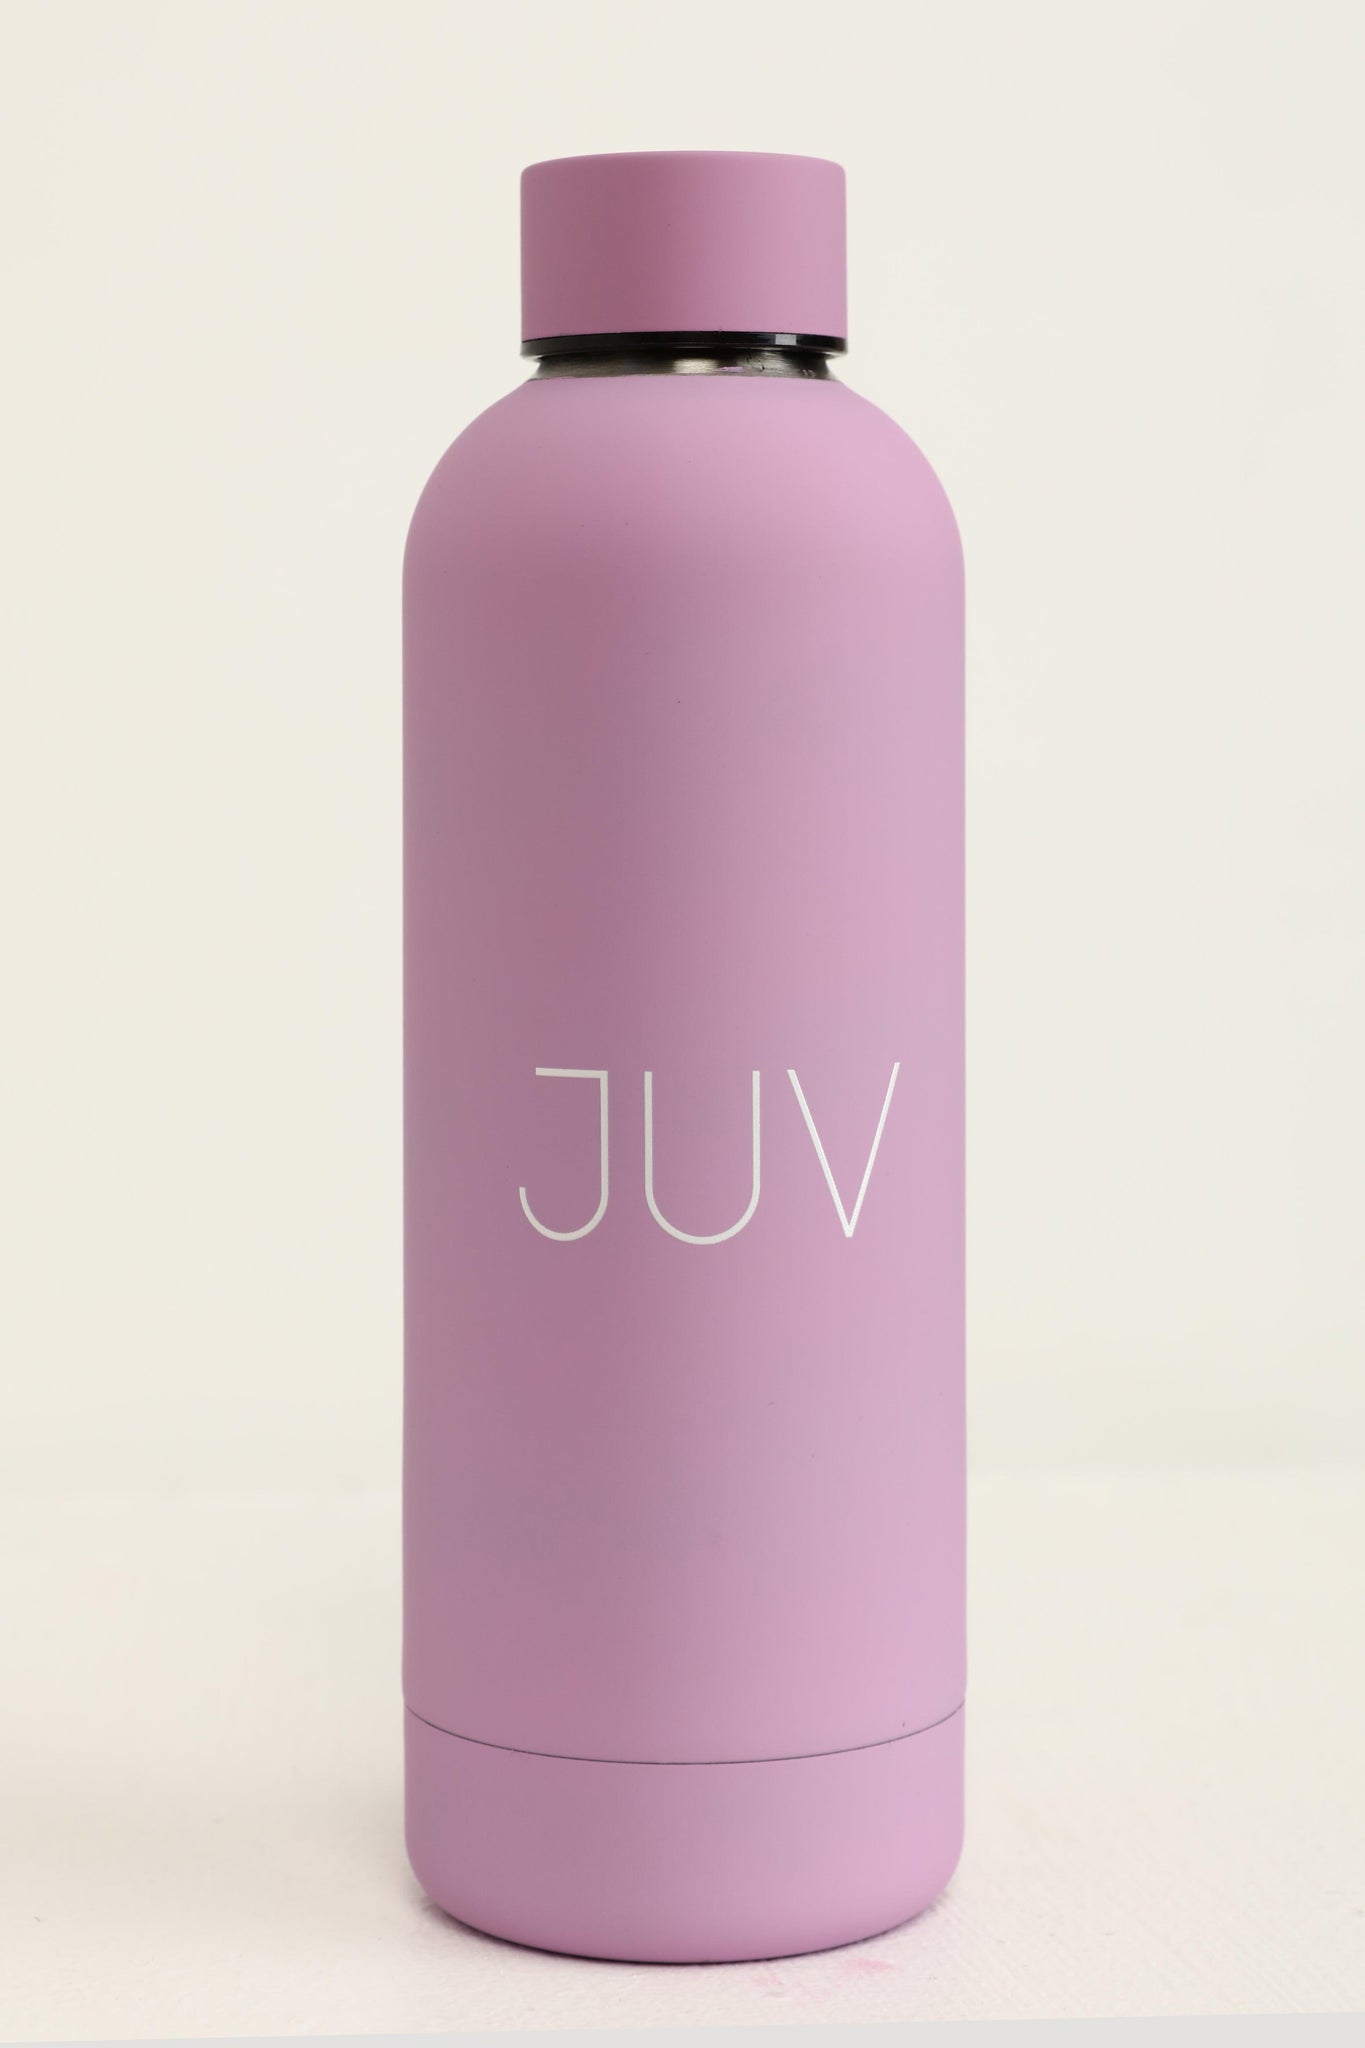 JUV mia thermal bottle in purple, front view.